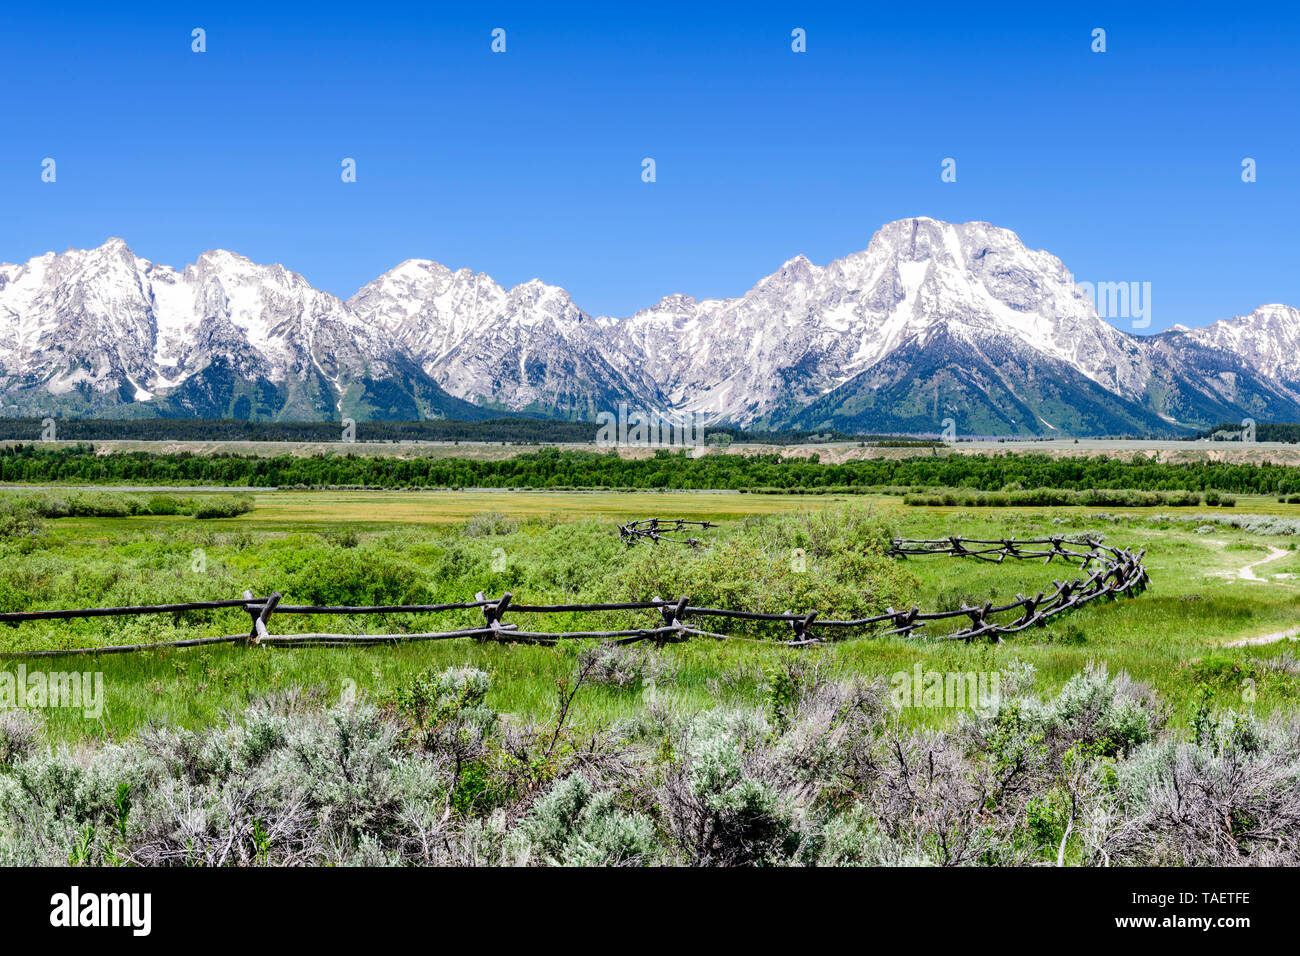 A fence with the Grand Tetons in the background in Grand Teton National Park near Jackson Hole, Wyoming USA. Stock Photo